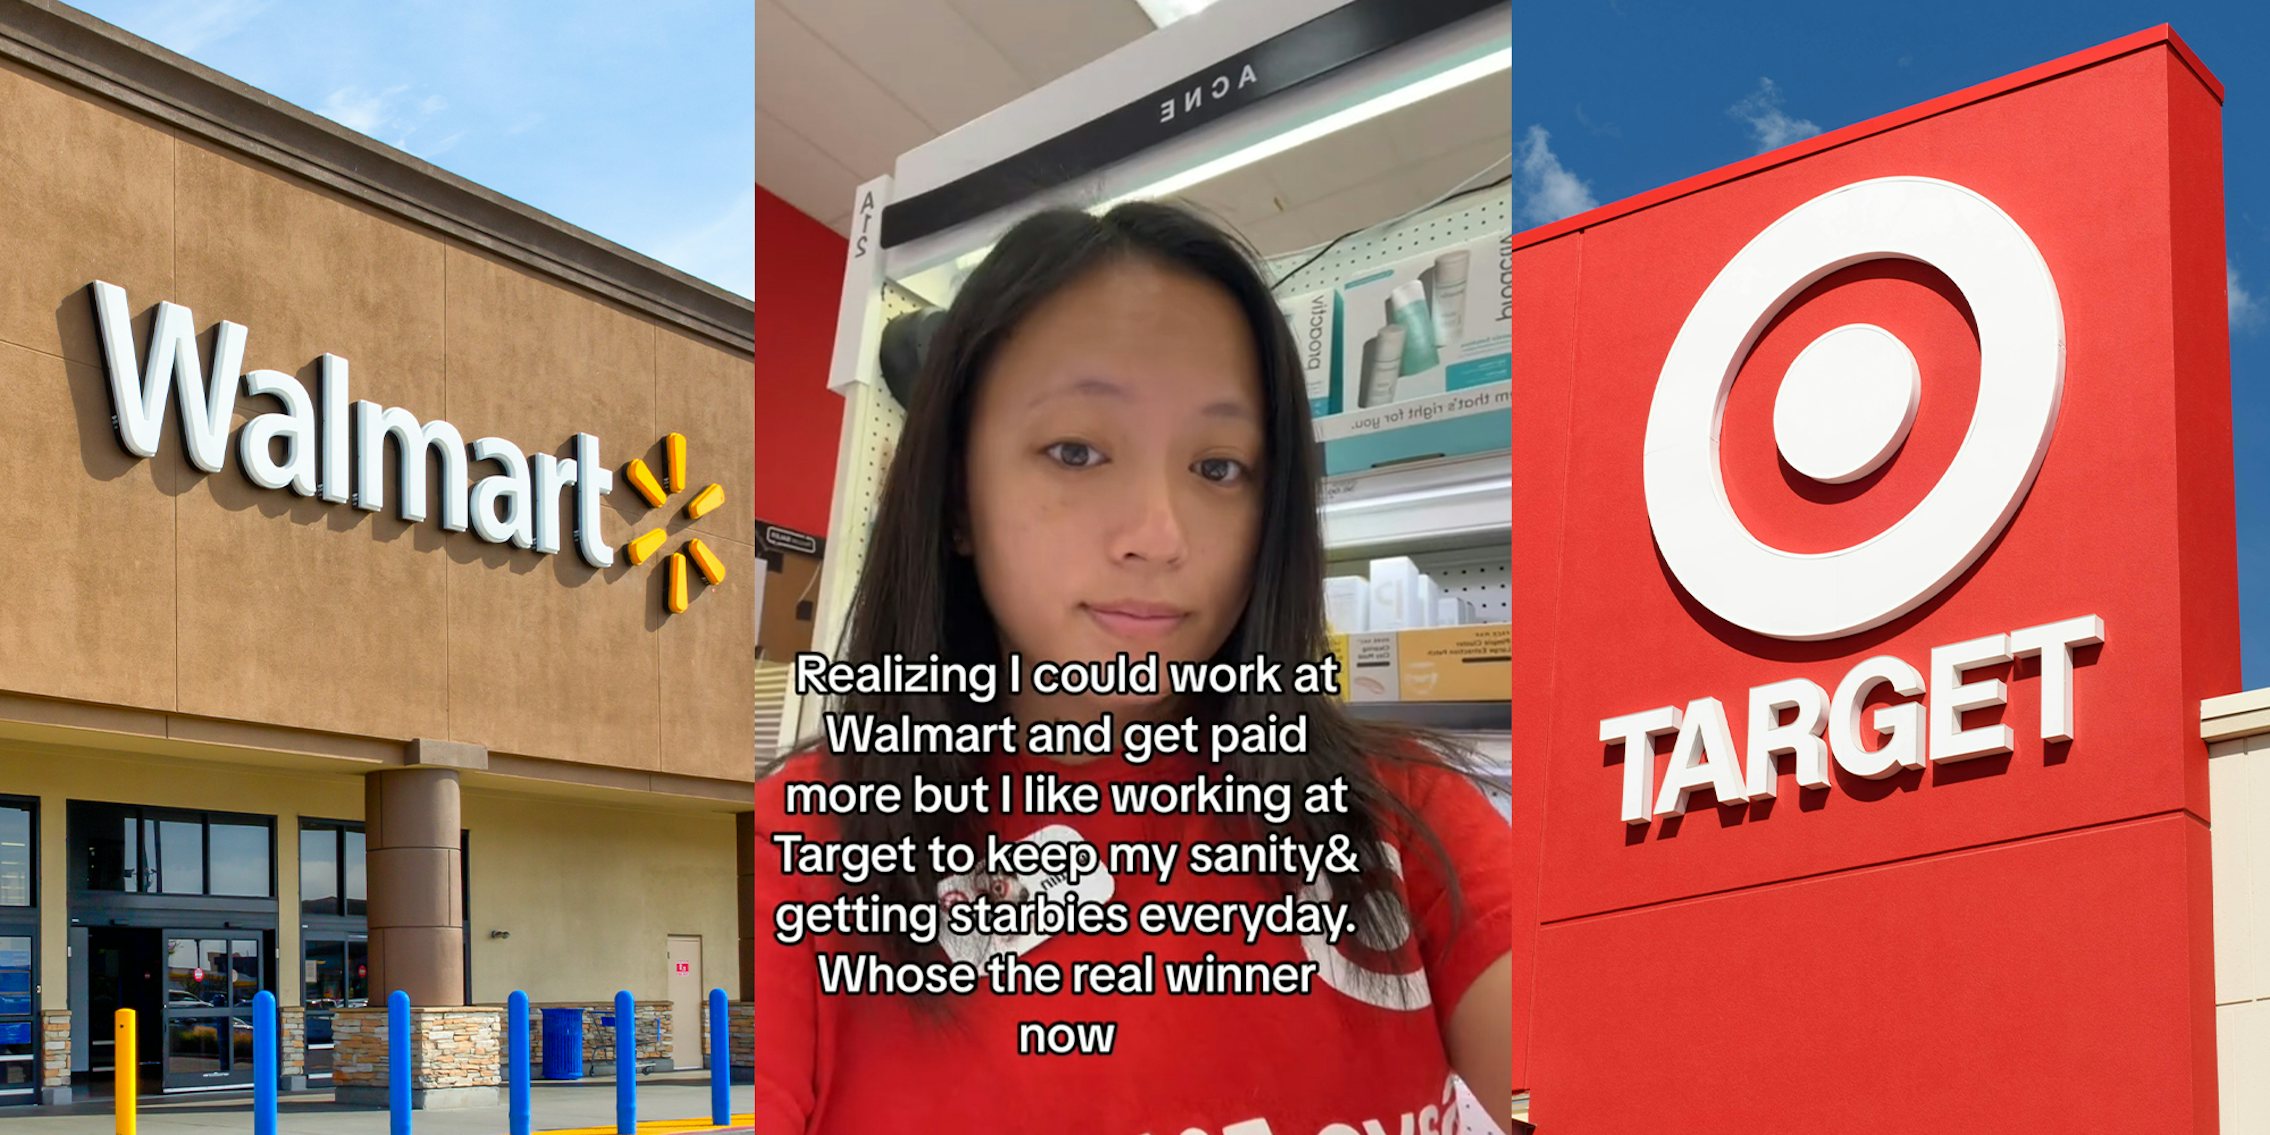 Target worker says she could be making more money at Walmart